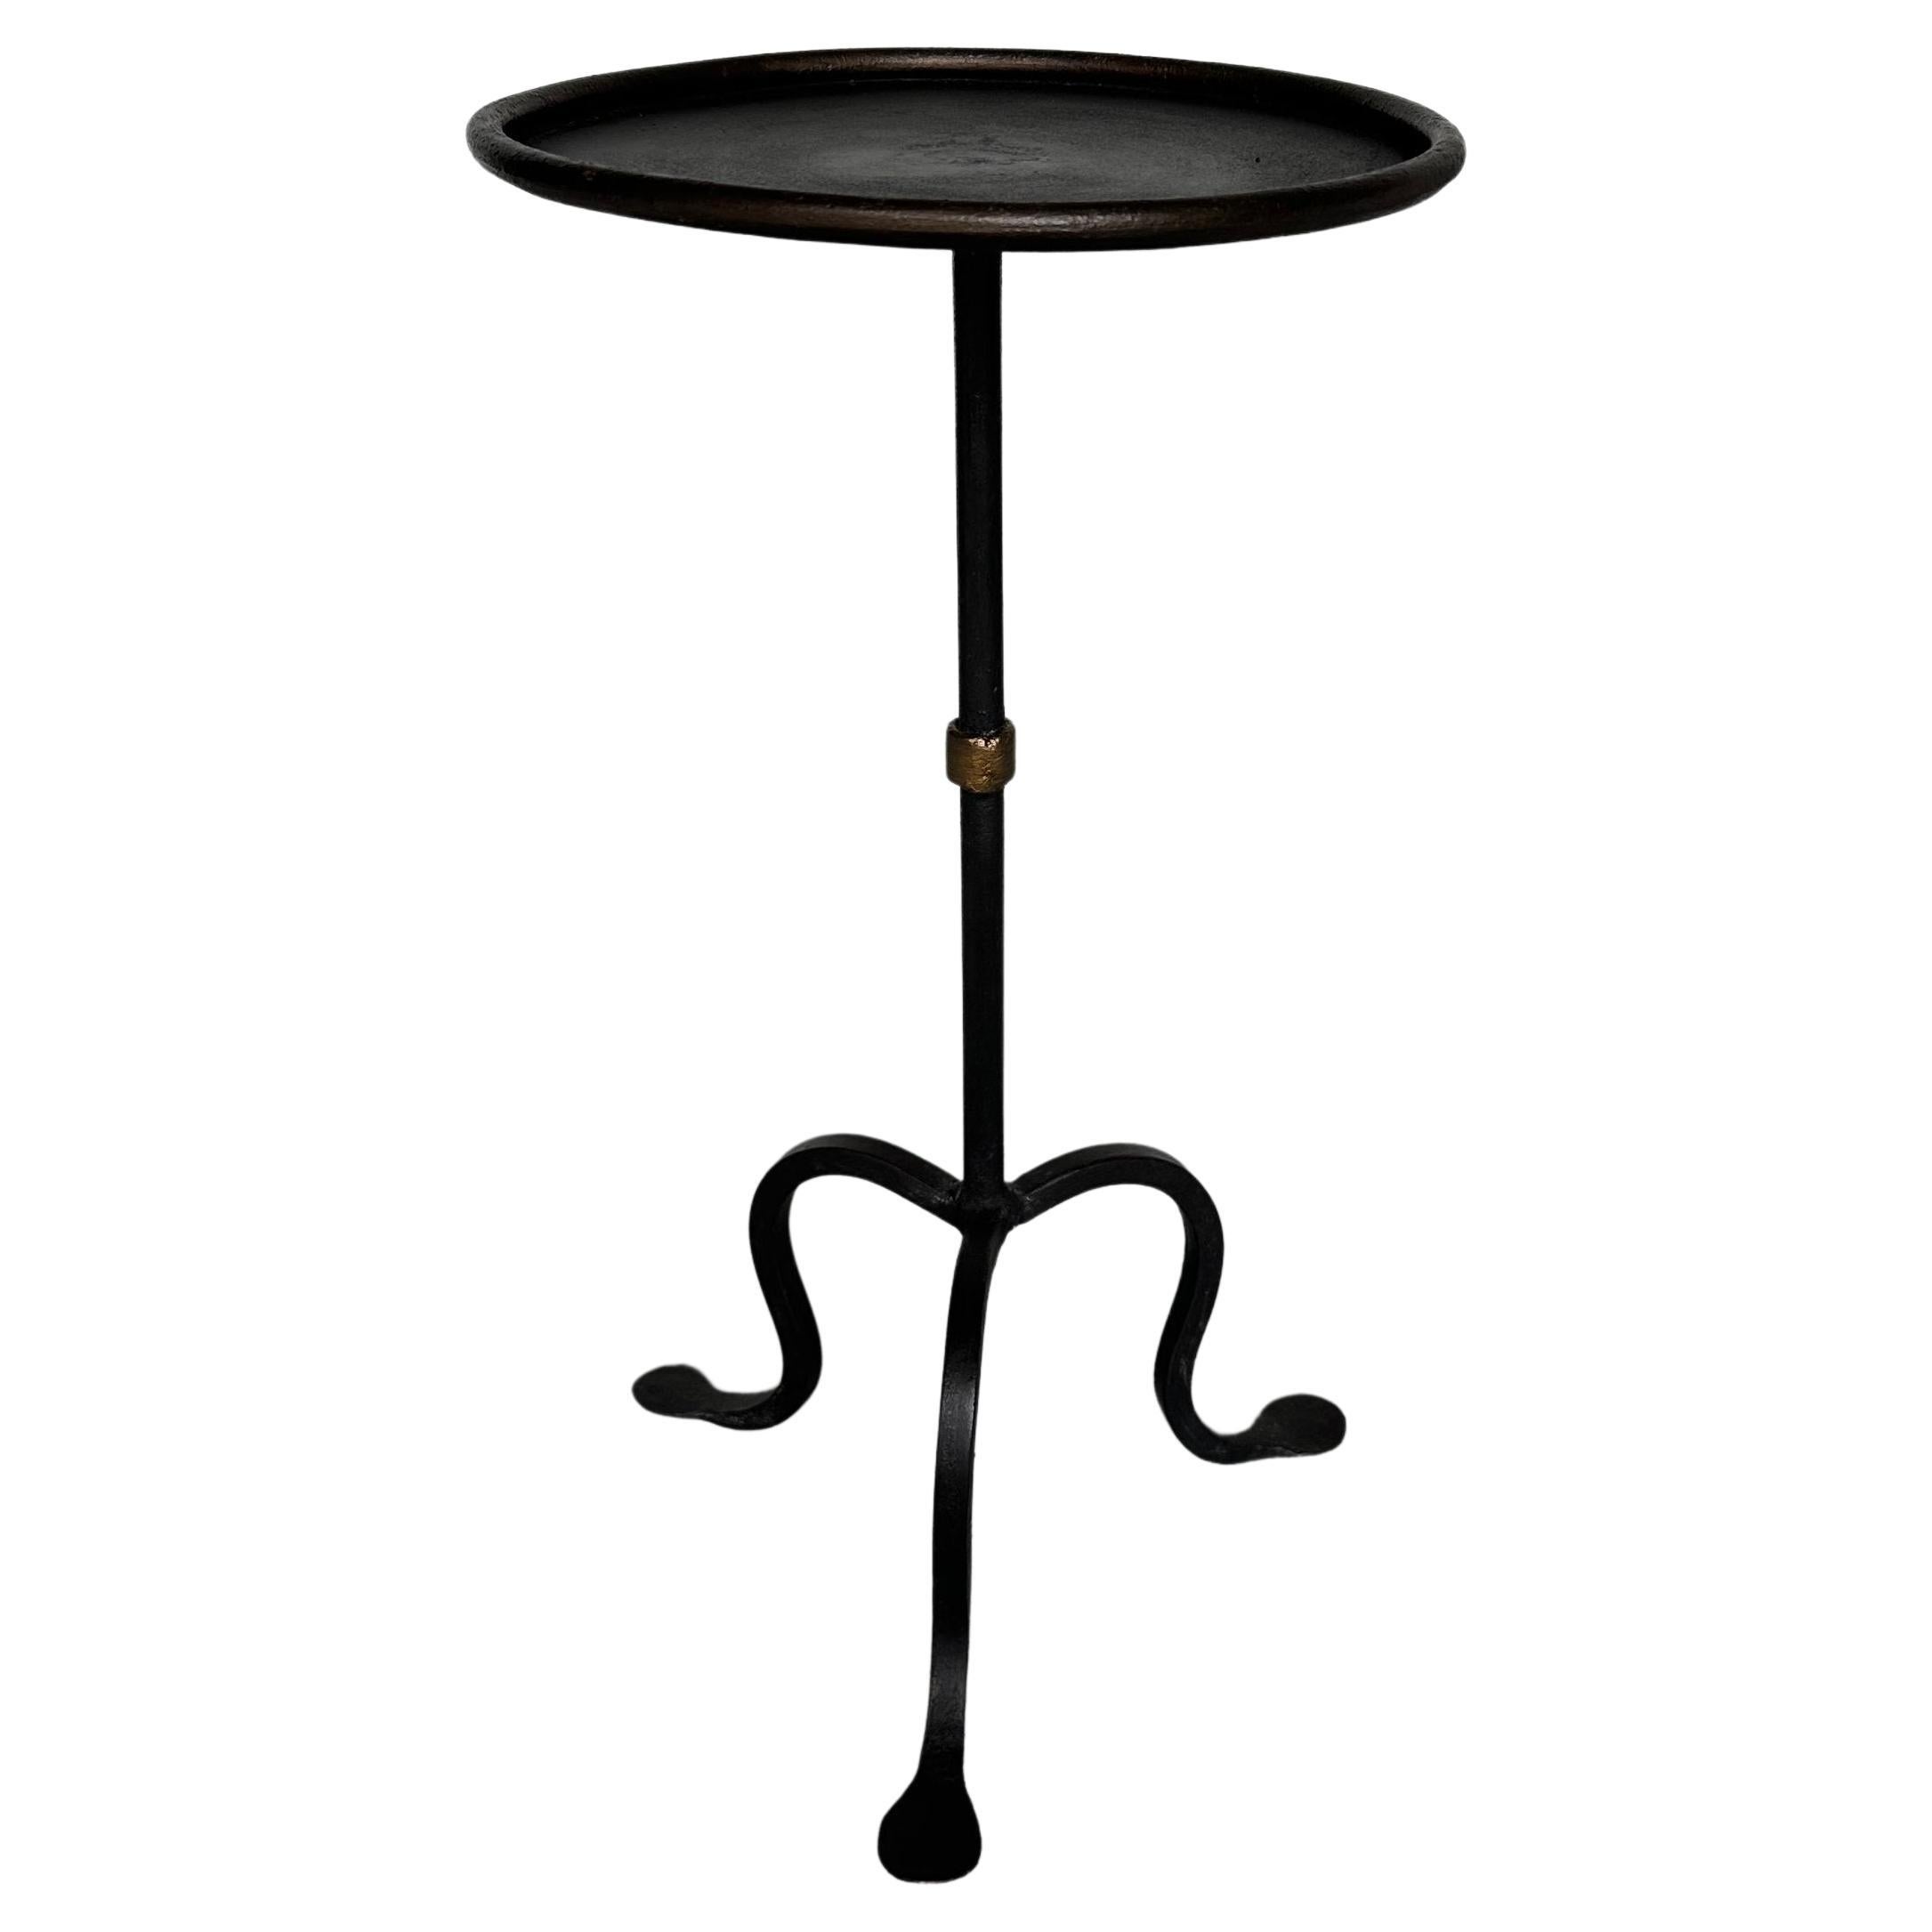 Small Hand-painted Black Spanish Drinks Table